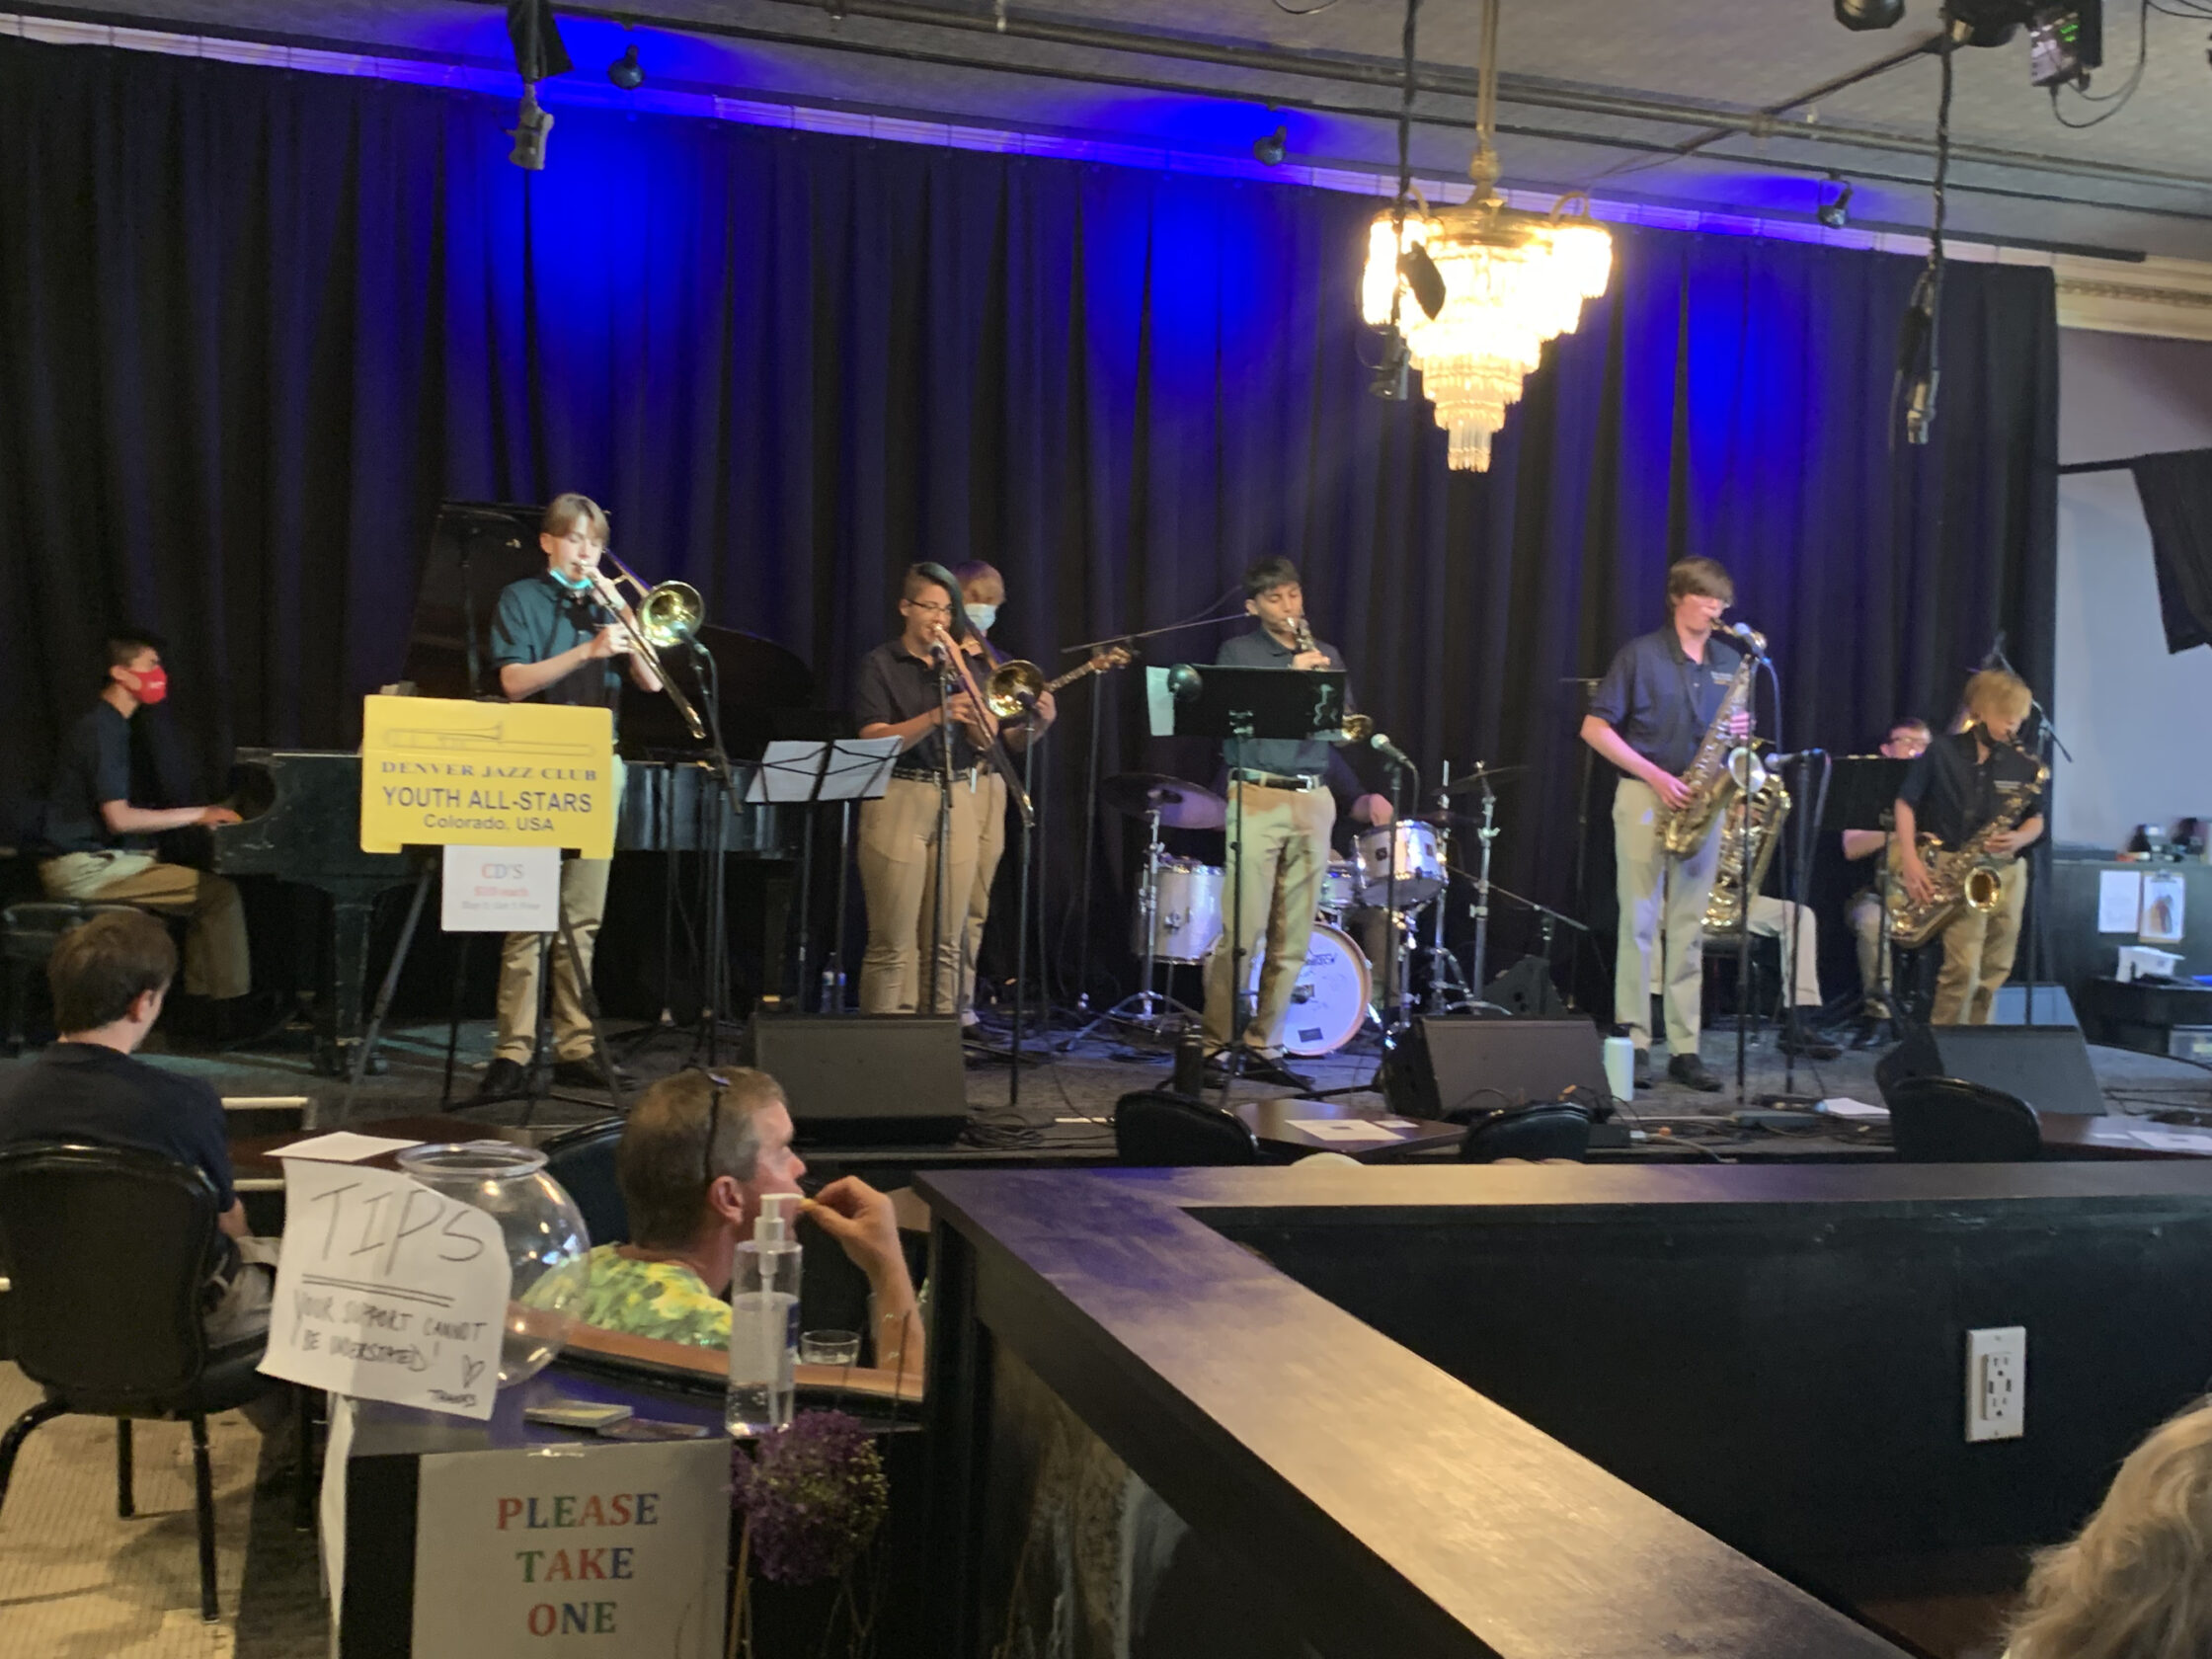 Final 2020-21 Denver Jazz Club Youth All-Star Concert at Dazzle Jazz Club on Saturday, July 10th (1:30-2:45pm)